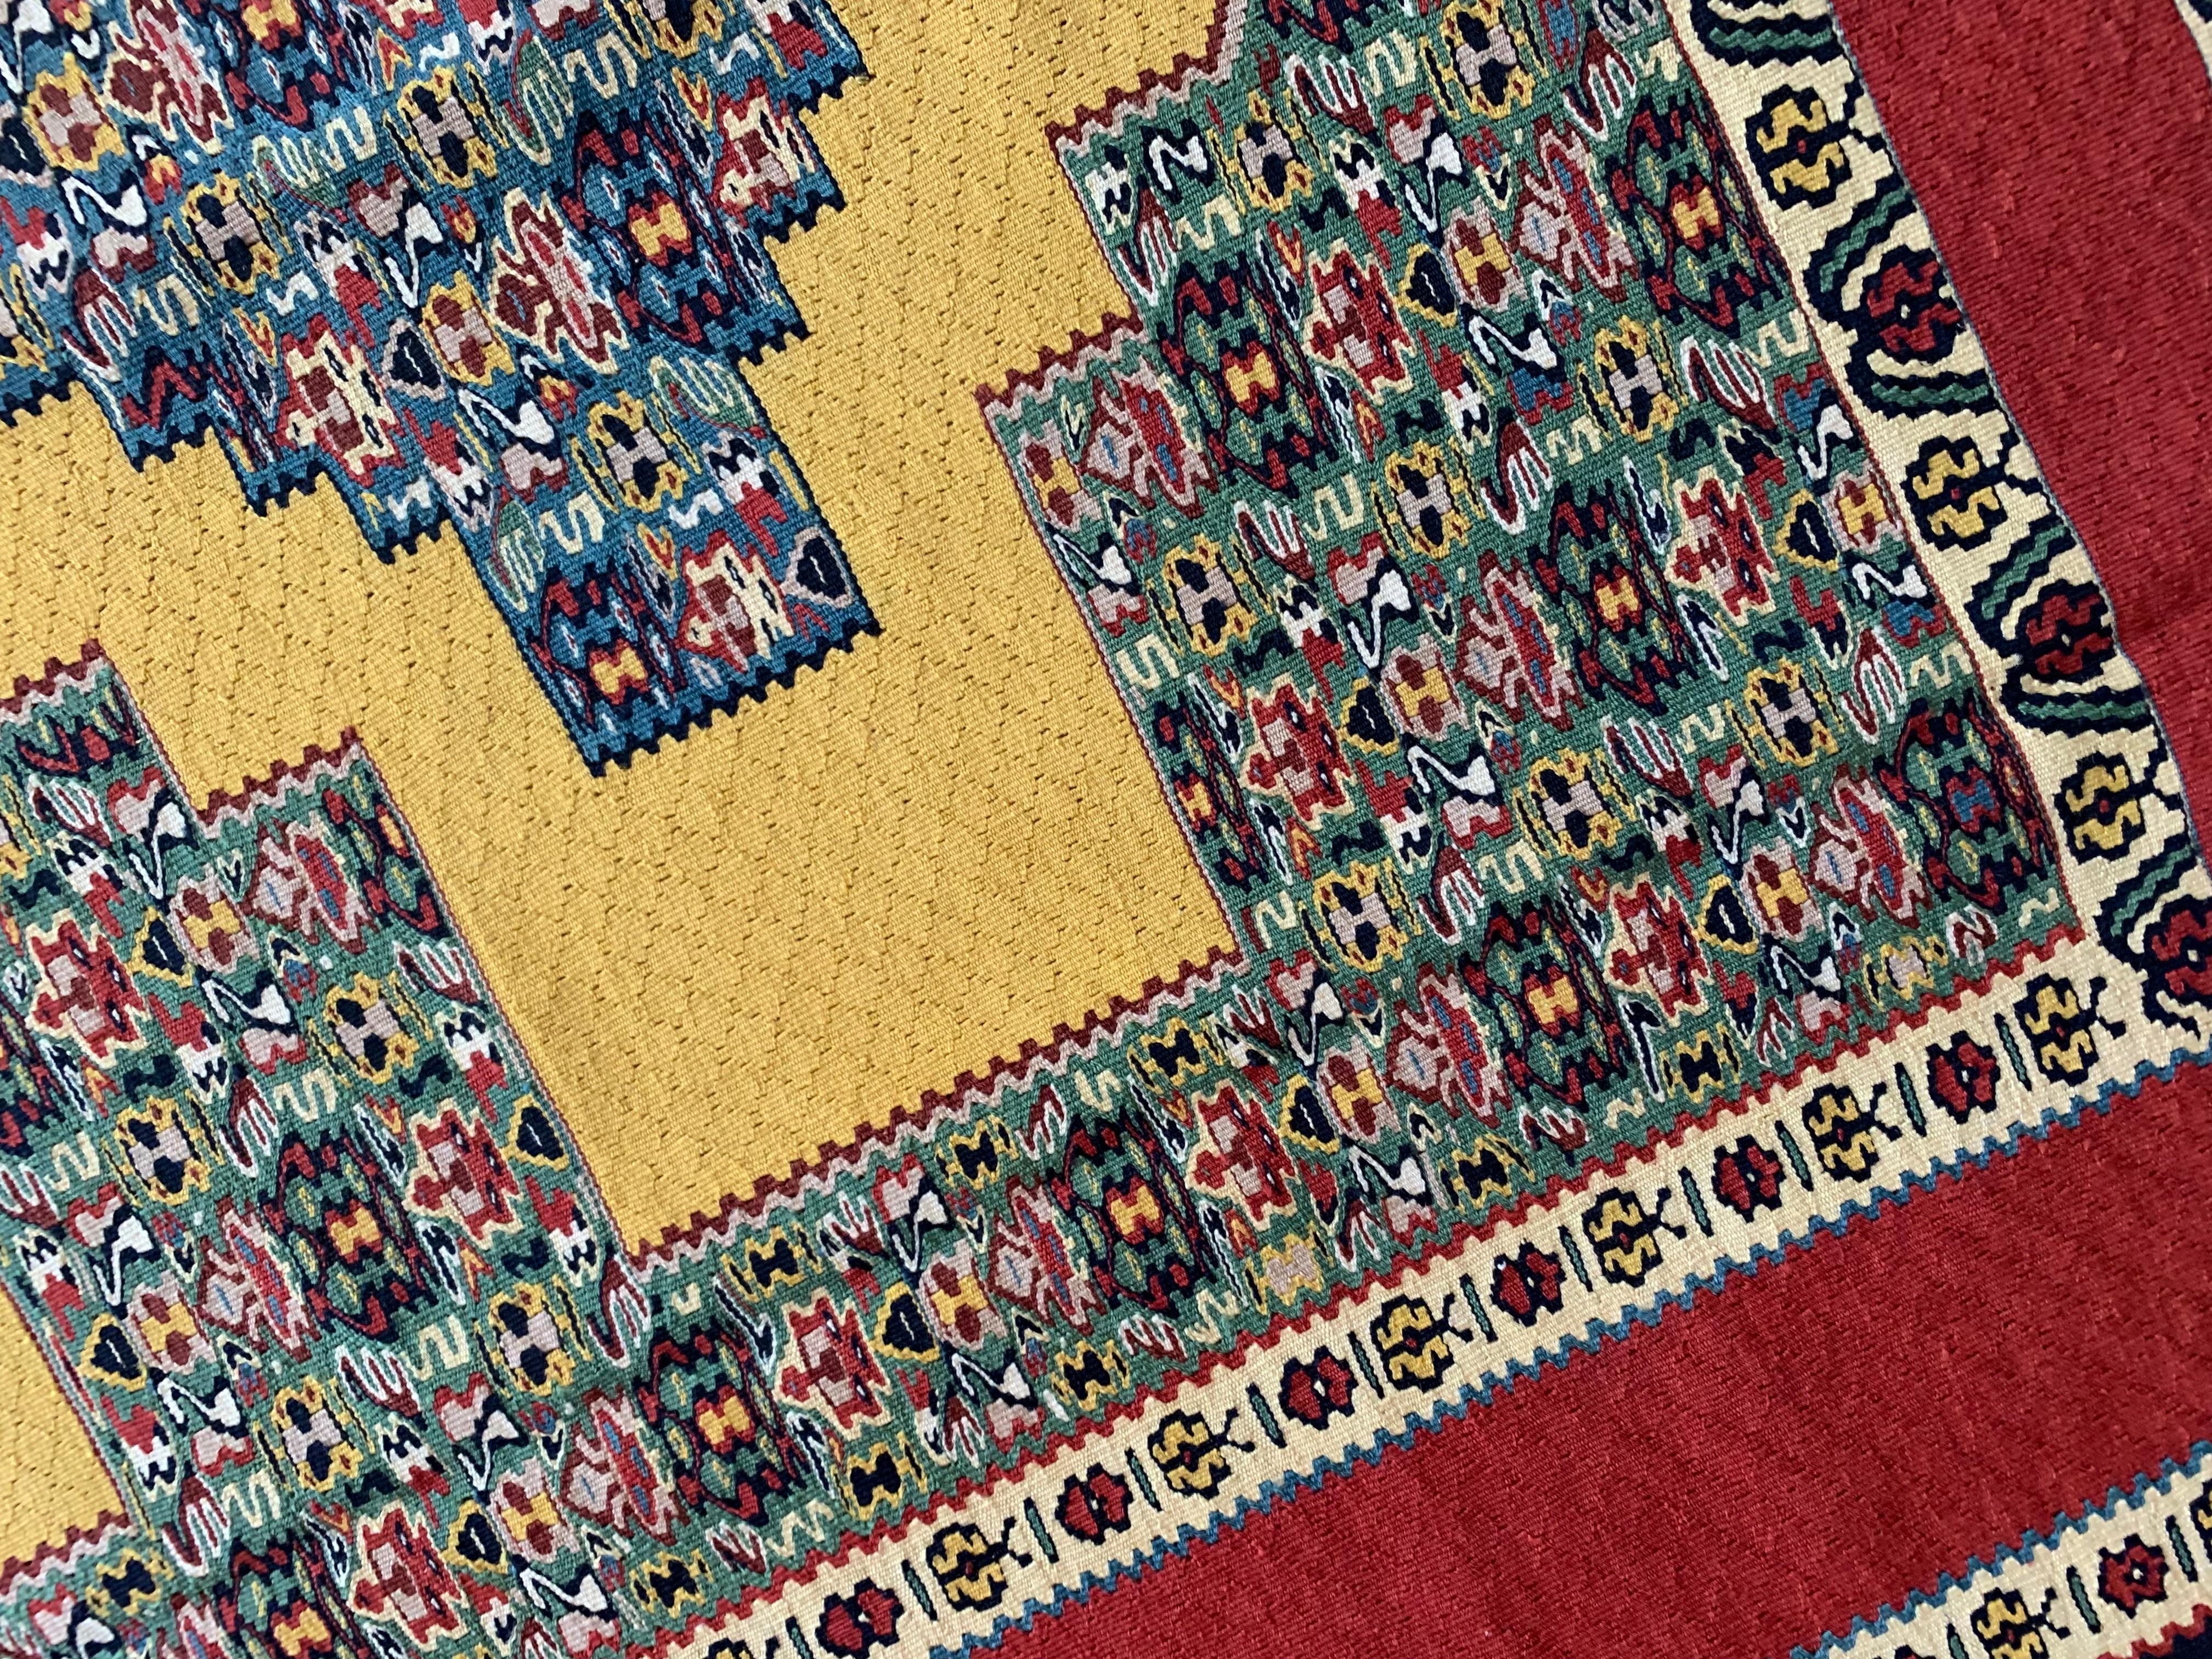 These fine wool and silk rugs are handmade flatwoven Kilim rugs, construected in the early 2000s, circa 2010. The central design has been woven on a vibrant yellow background and features a trio of medallions made up of intricate patterns in colours